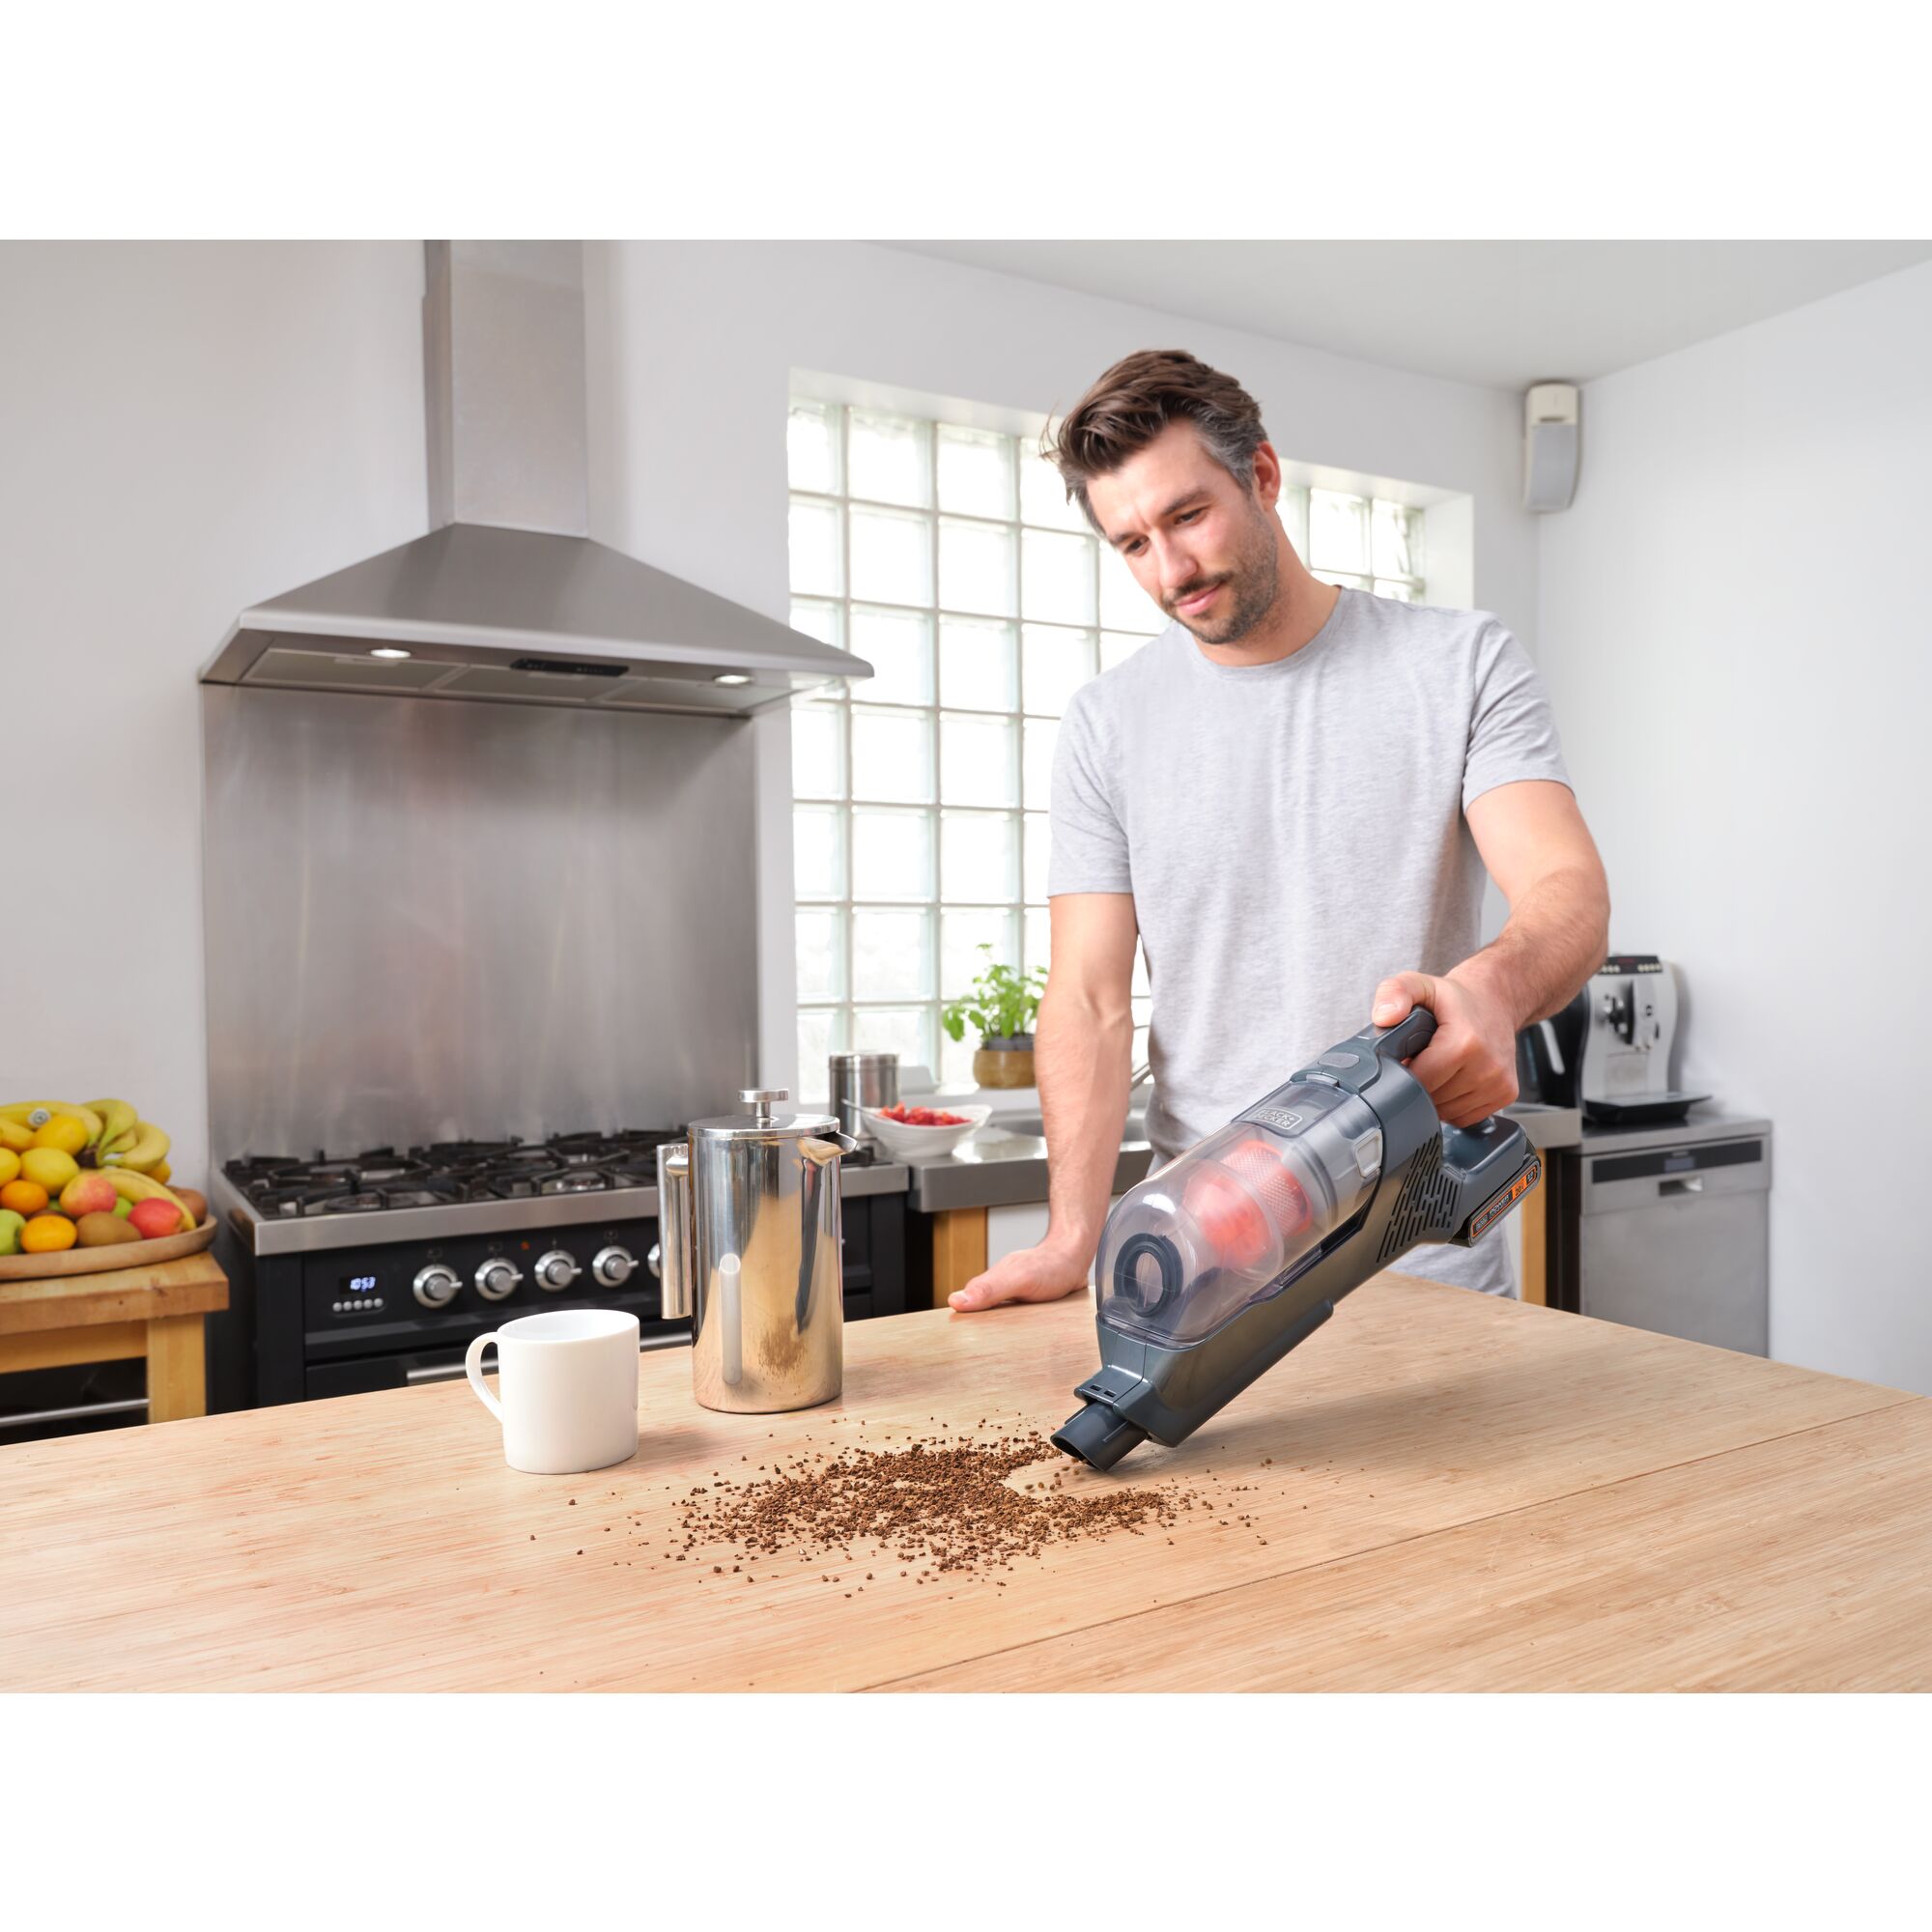 POWER SERIES plus Cordless Stick Vacuum being used to clean coffee powder from counter table.